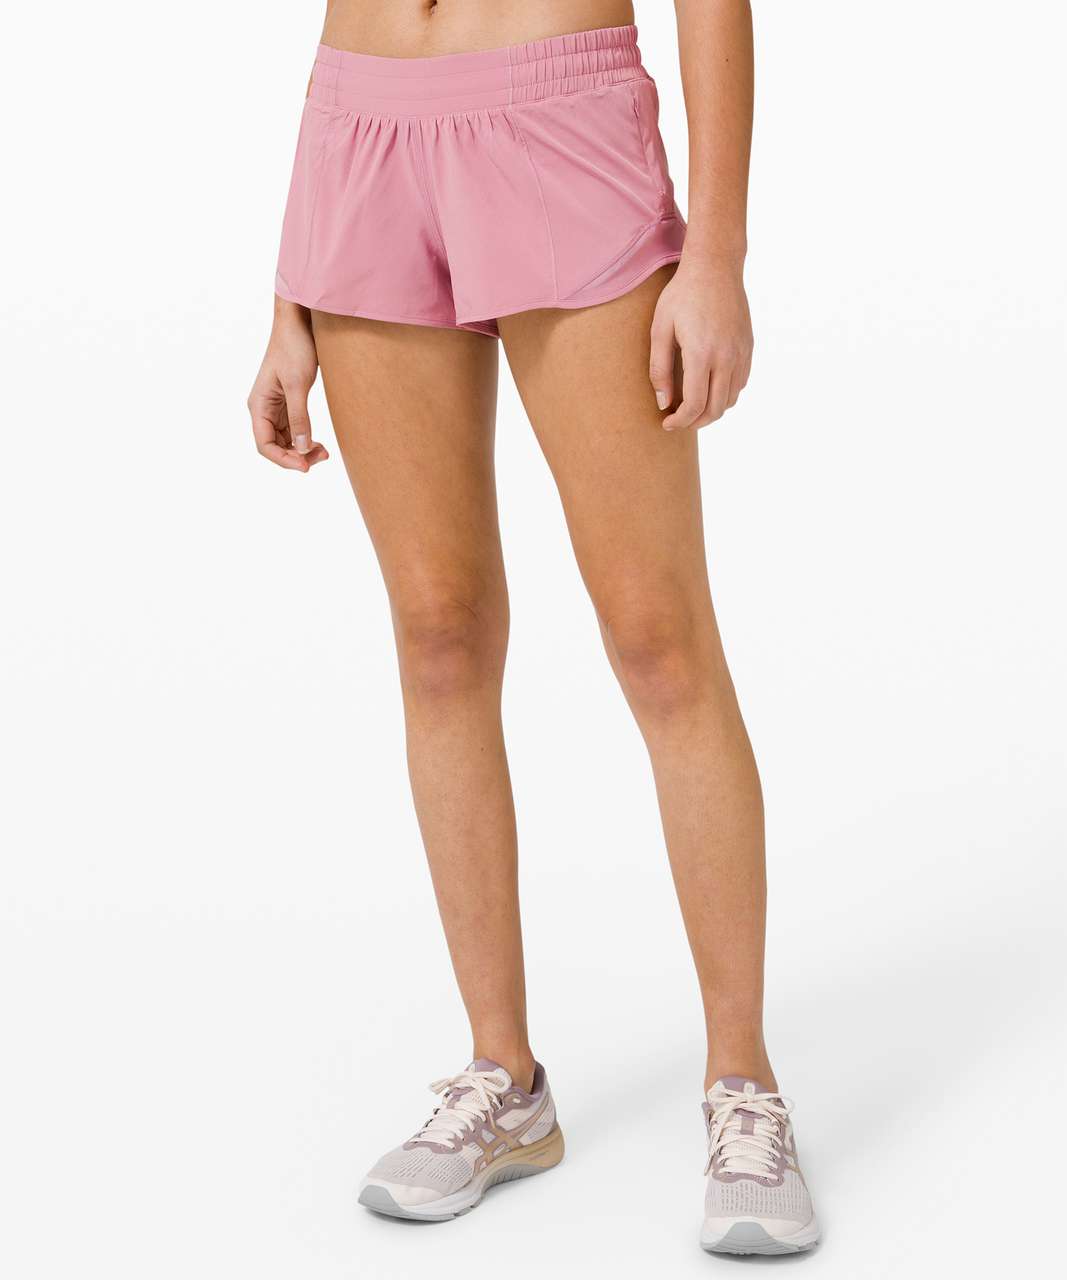 Lululemon Hotty Hot Short 2.5'' Pink Size 8 - $110 New With Tags - From  Regan